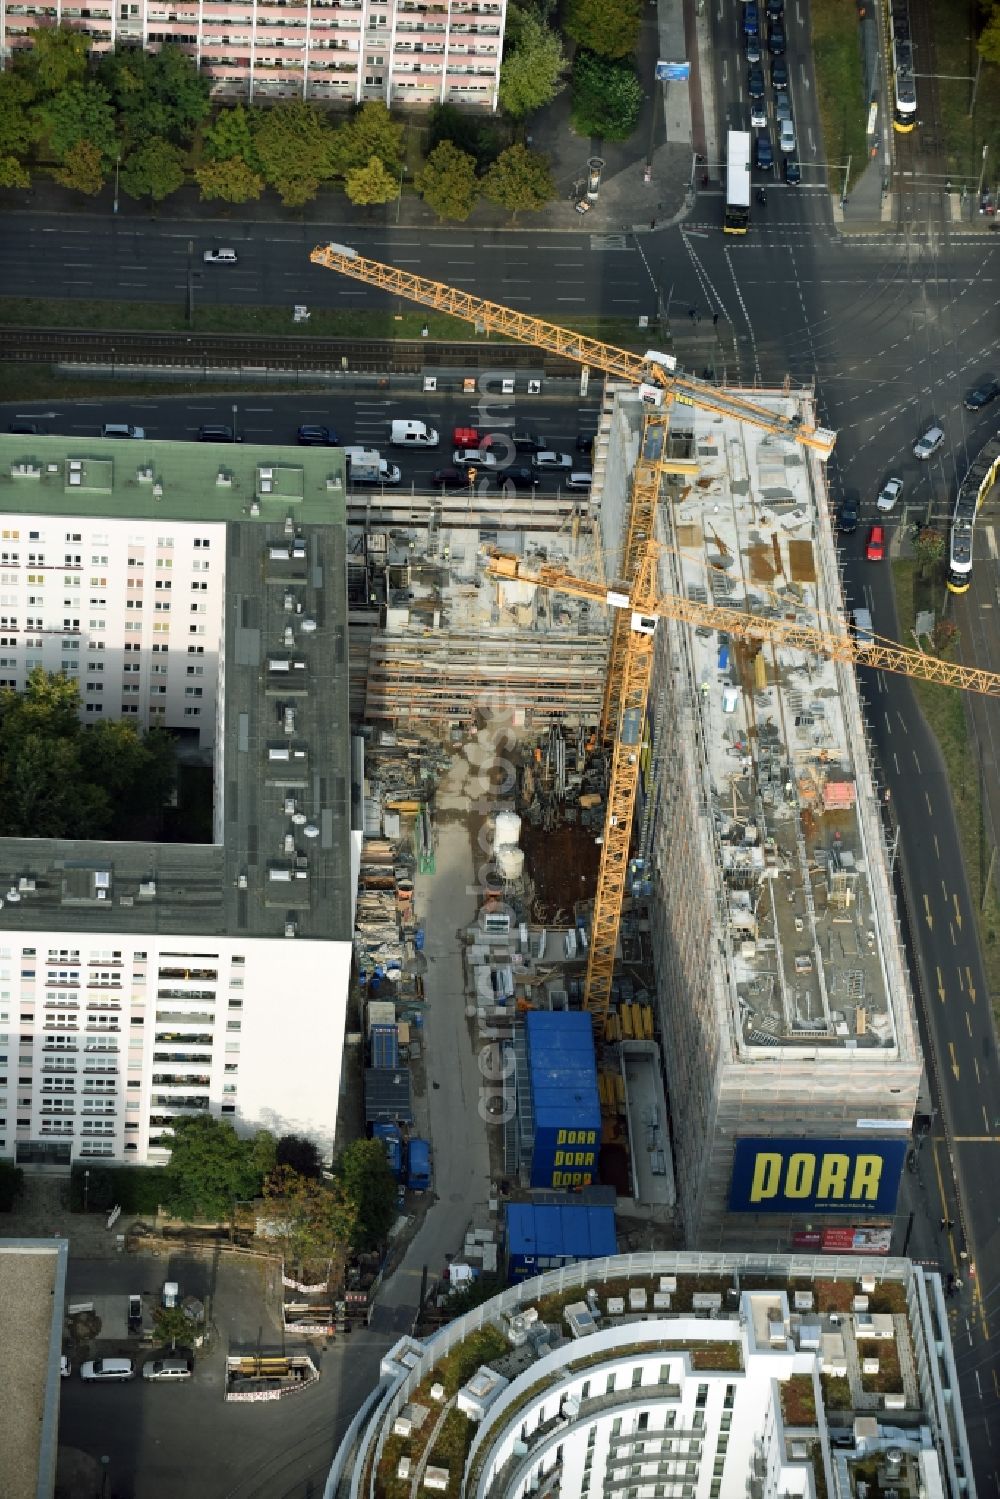 Berlin from the bird's eye view: Construction site of Porr Deutschland GmbH to build a new student dormitory - building LAMBERT HOLDING GMBH Studio:B at Mollstrasse - Otto-Braun-Strasse in the Mitte district in Berlin